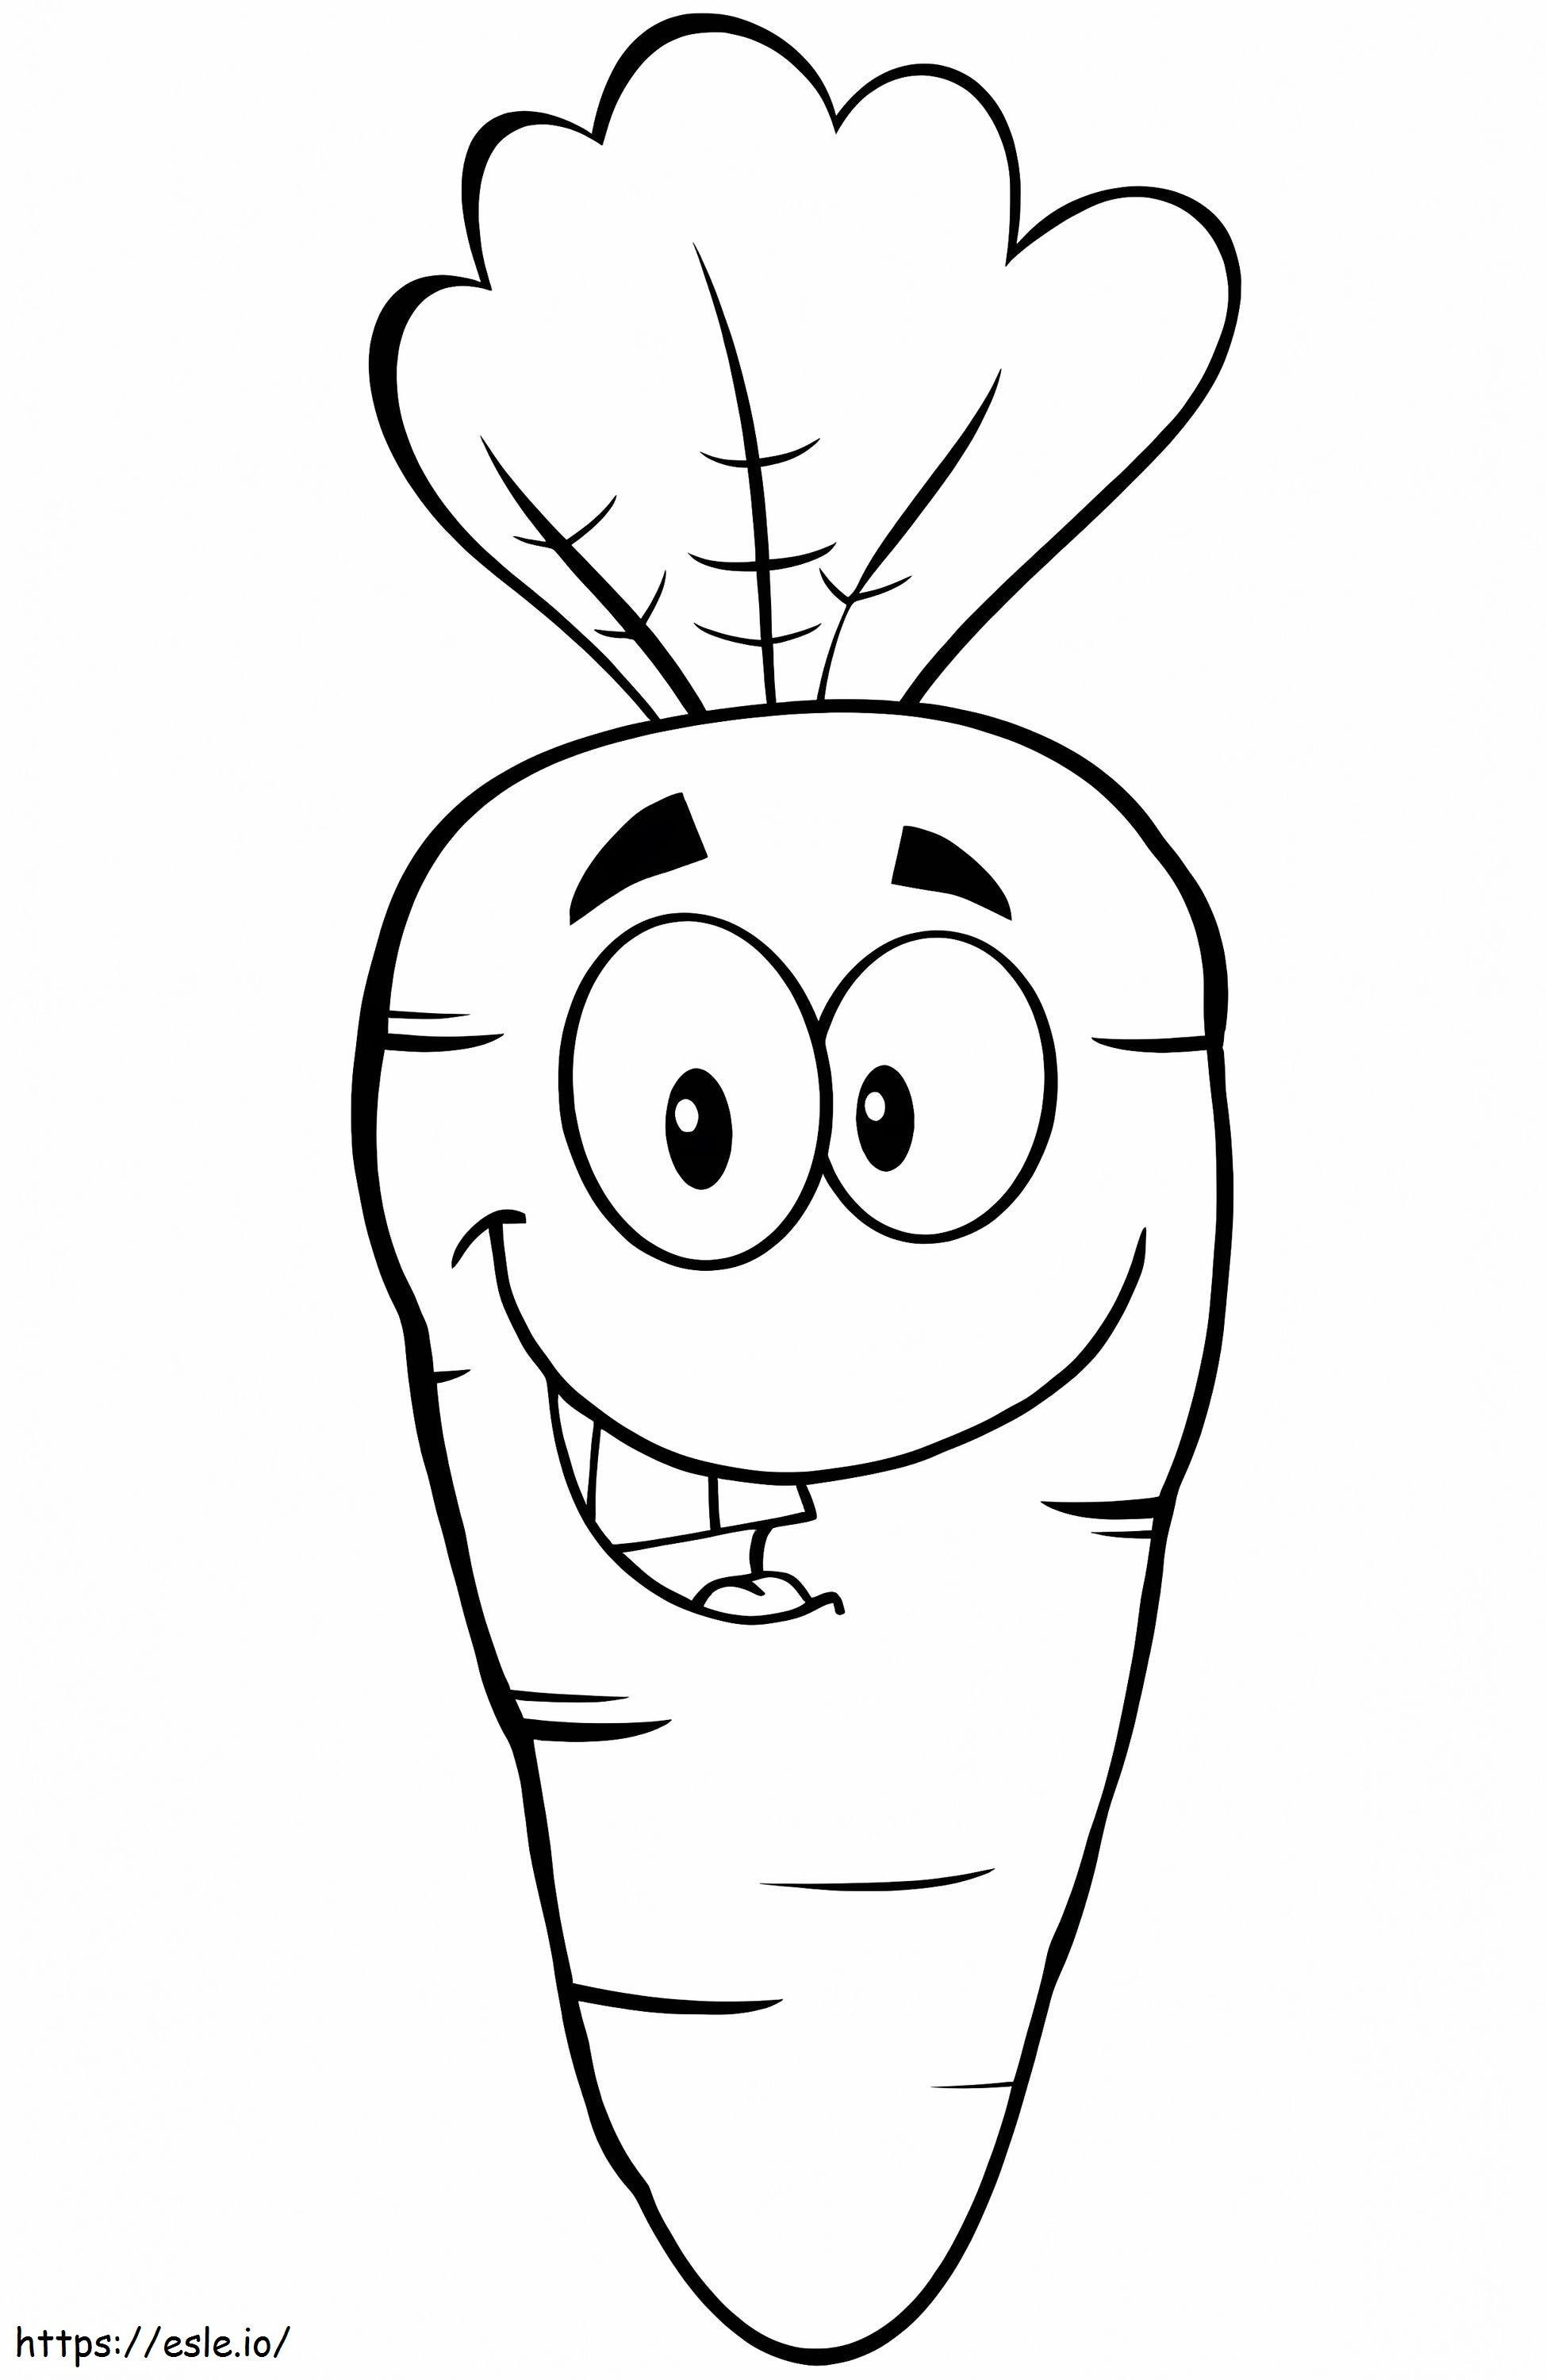 Cartoon Carrot coloring page